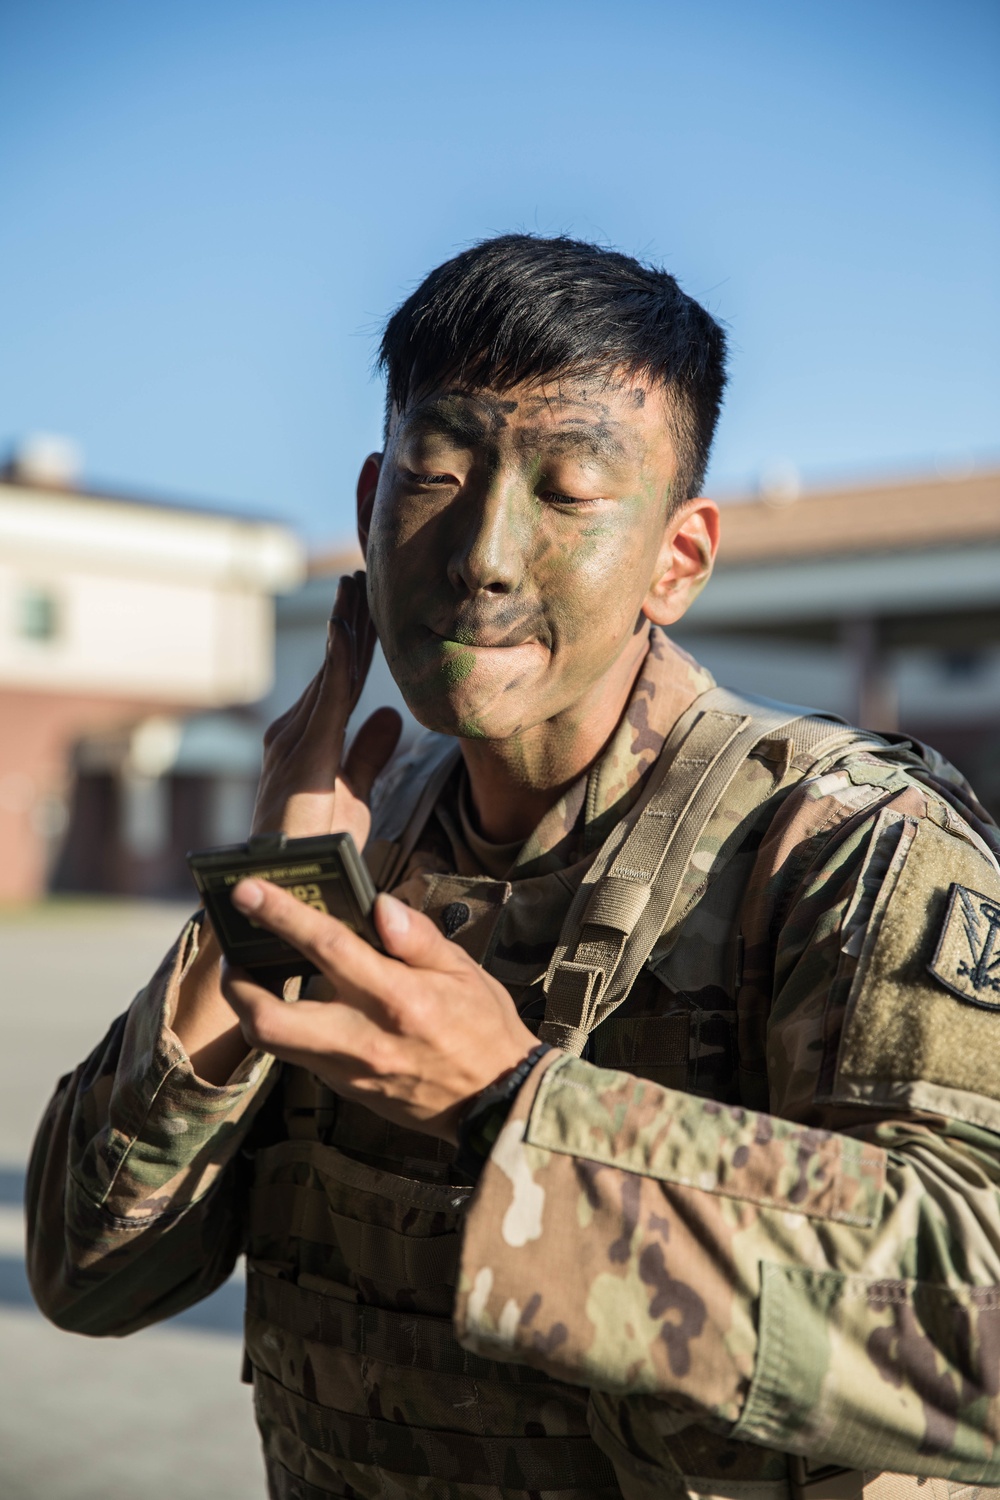 Spc. Hwui, Yoo, Eighth Army's Best Warrior Competes for Army title